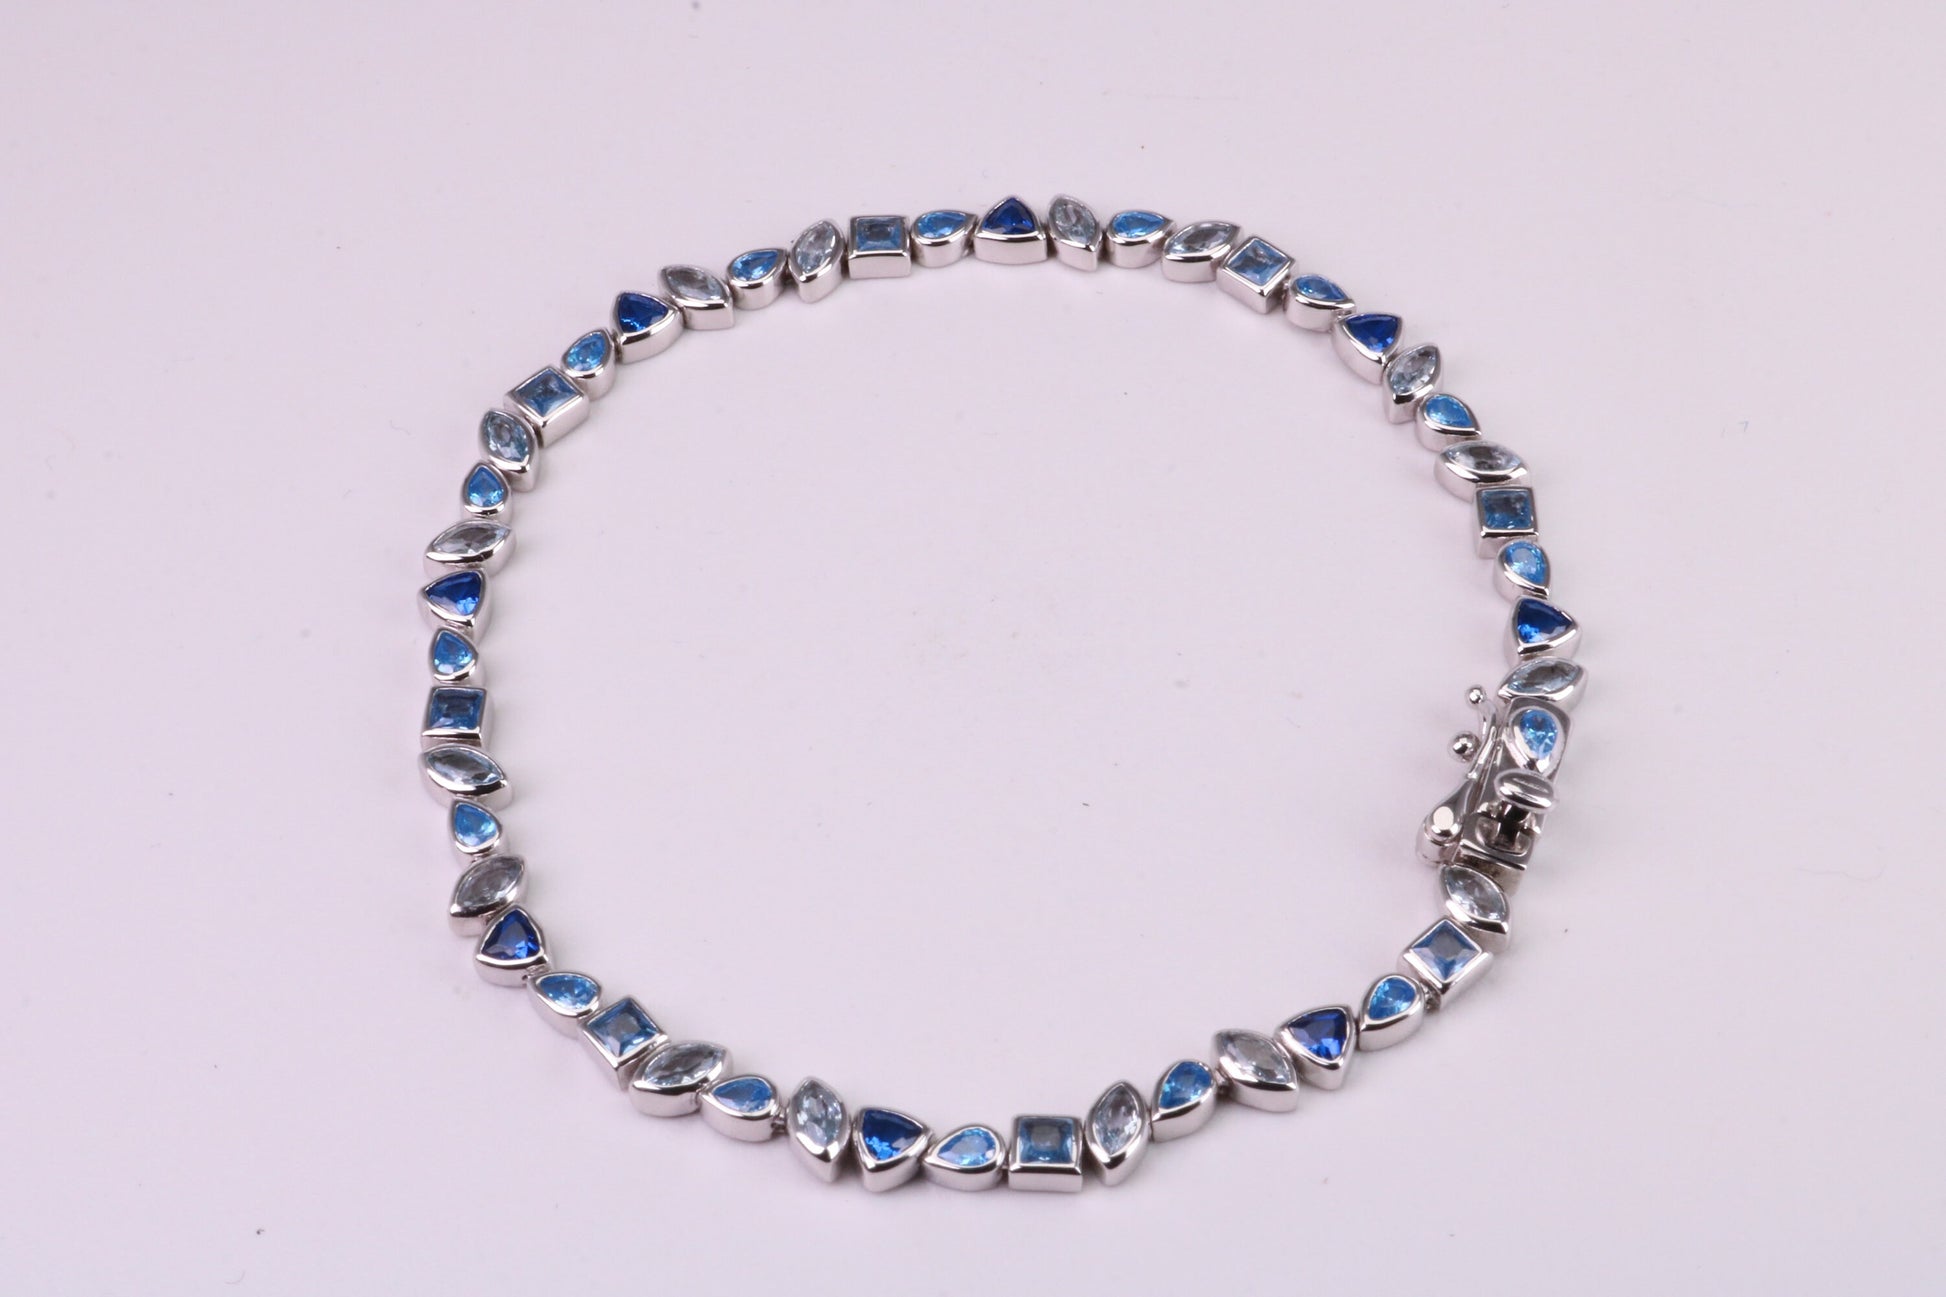 Blue Sapphire, Aquamarine and Topaz C Z Set Bracelet, 7.50 inch Length, Made from solid Sterling Silver